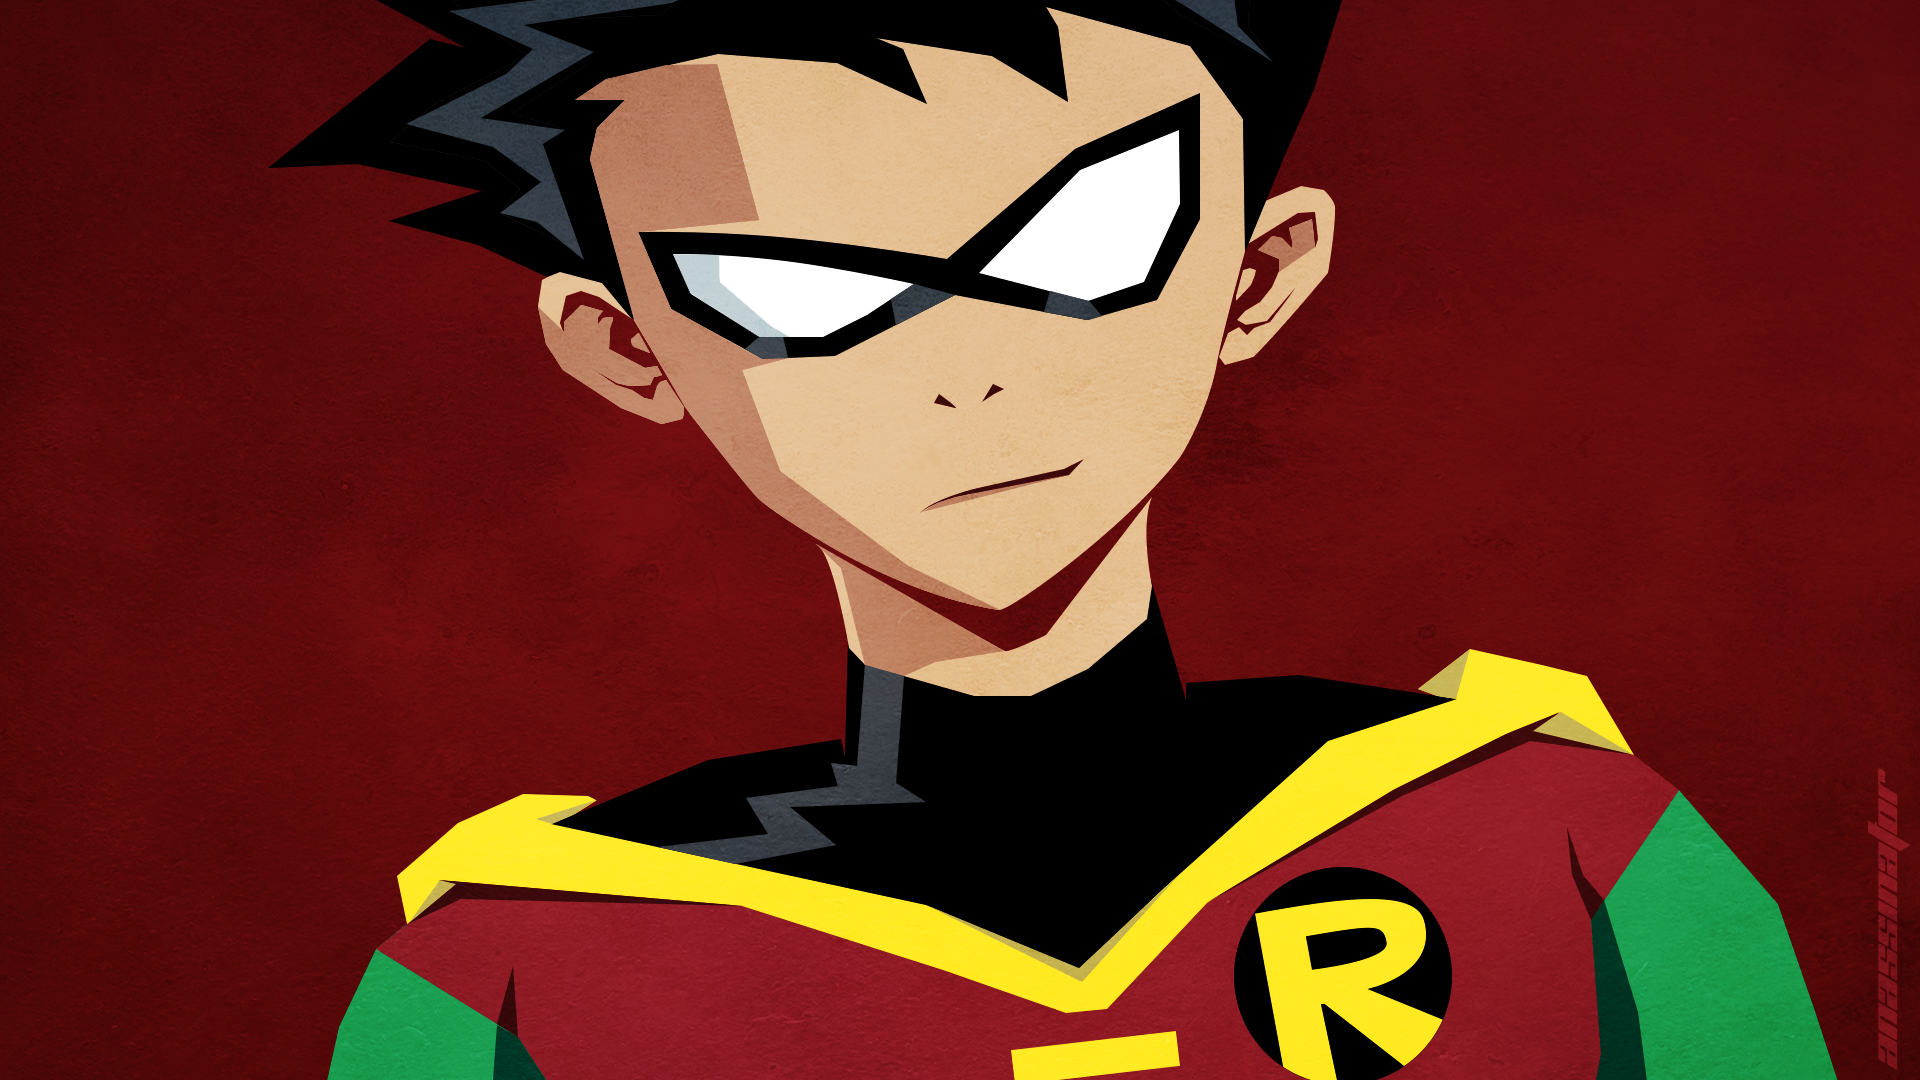 Teen Titans Robin Character Anime Red Background 1920x1080